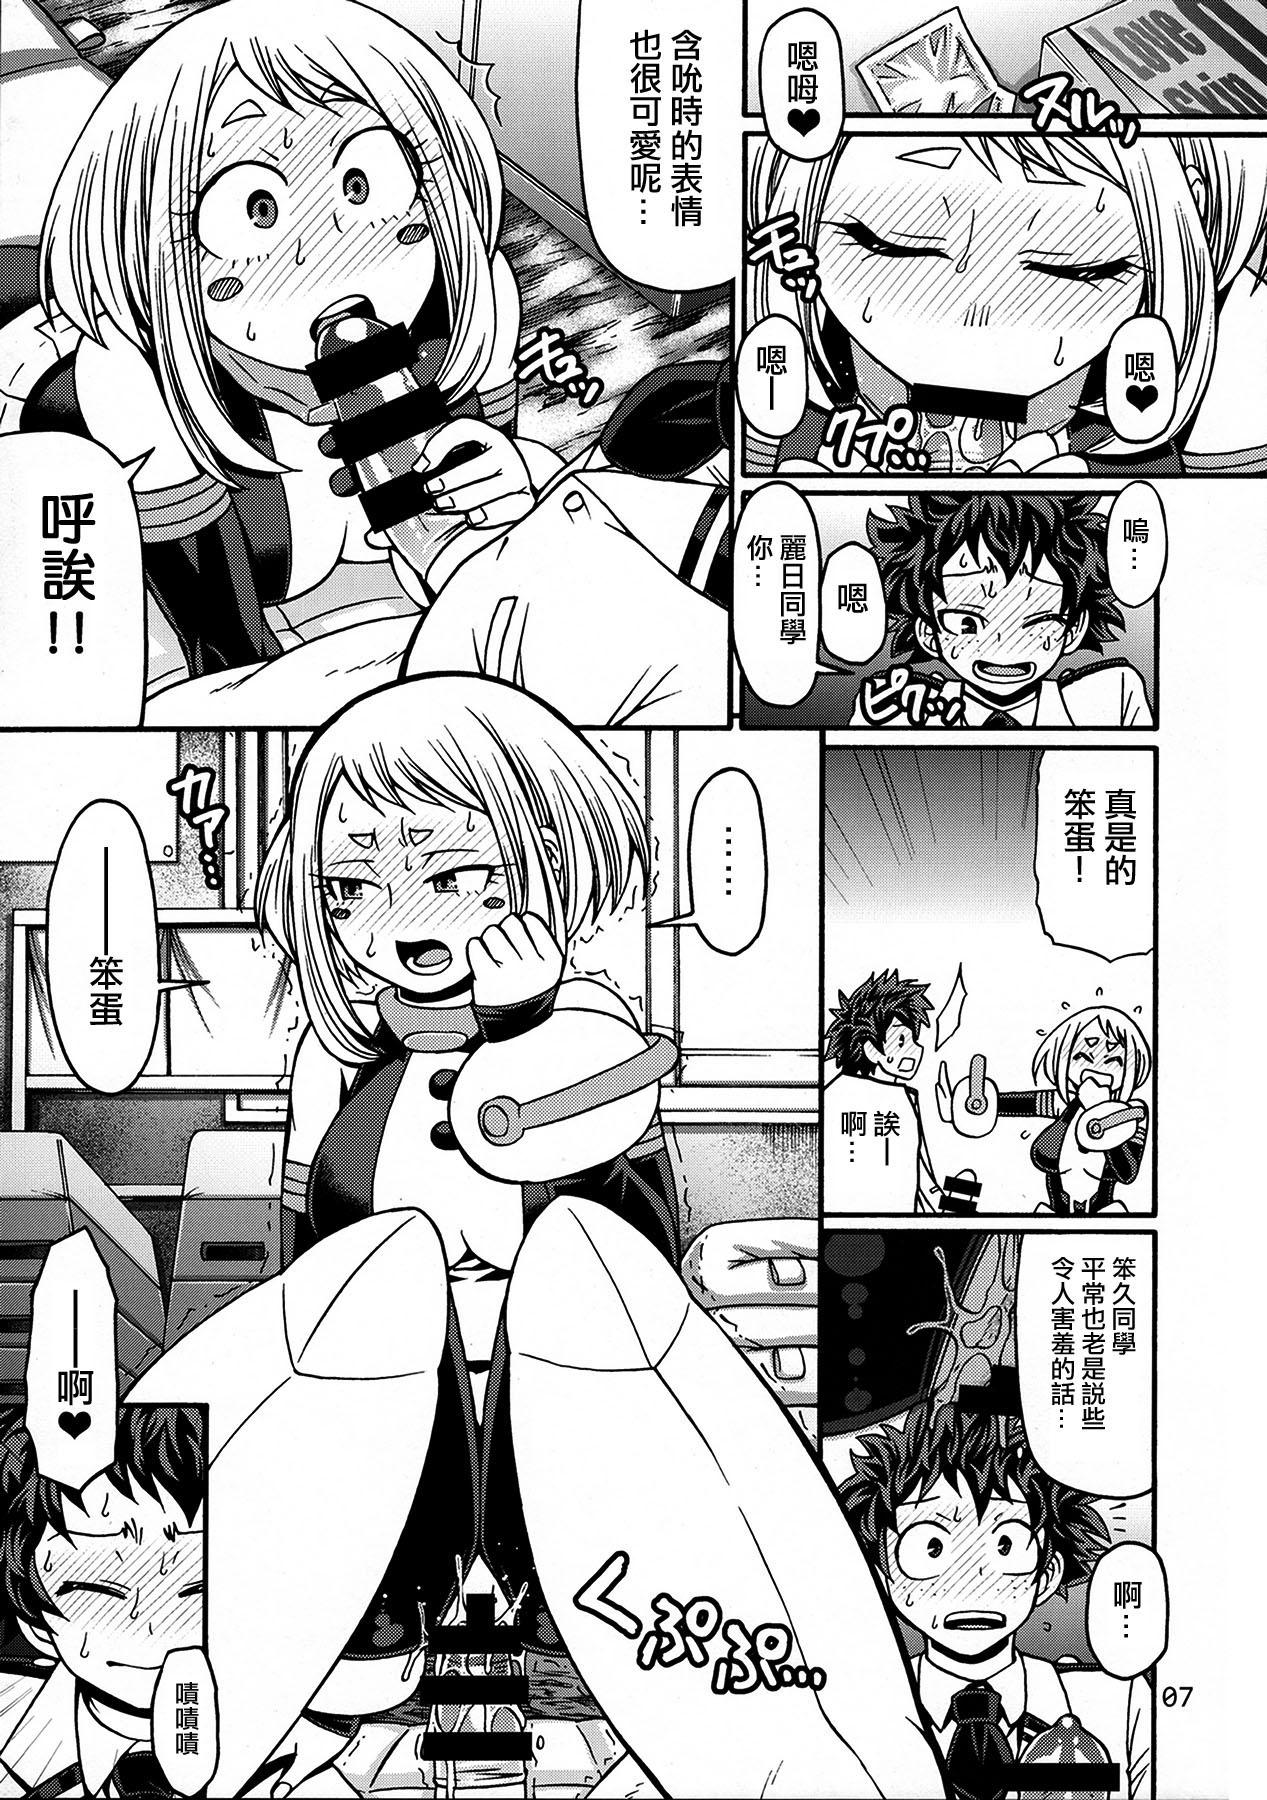 Cheat POPPIN' GIRLS - My hero academia Cums - Page 6